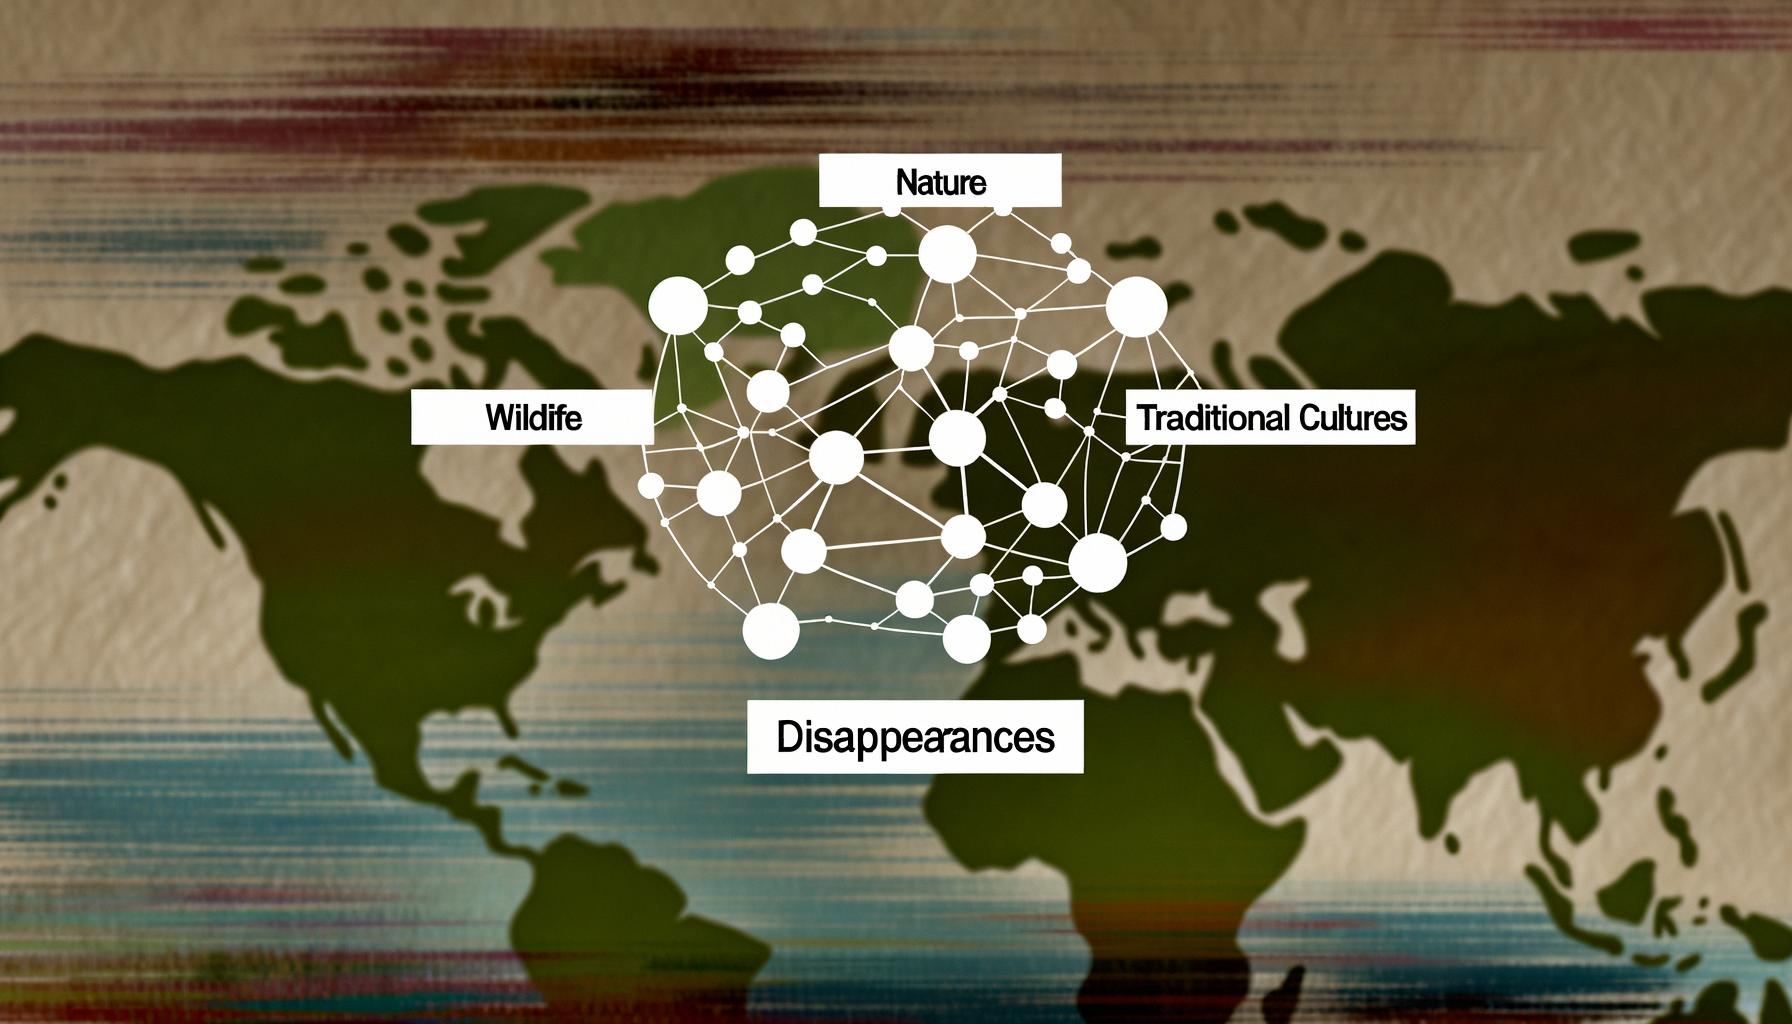 Global issues of disappearances across various domains Balanced News